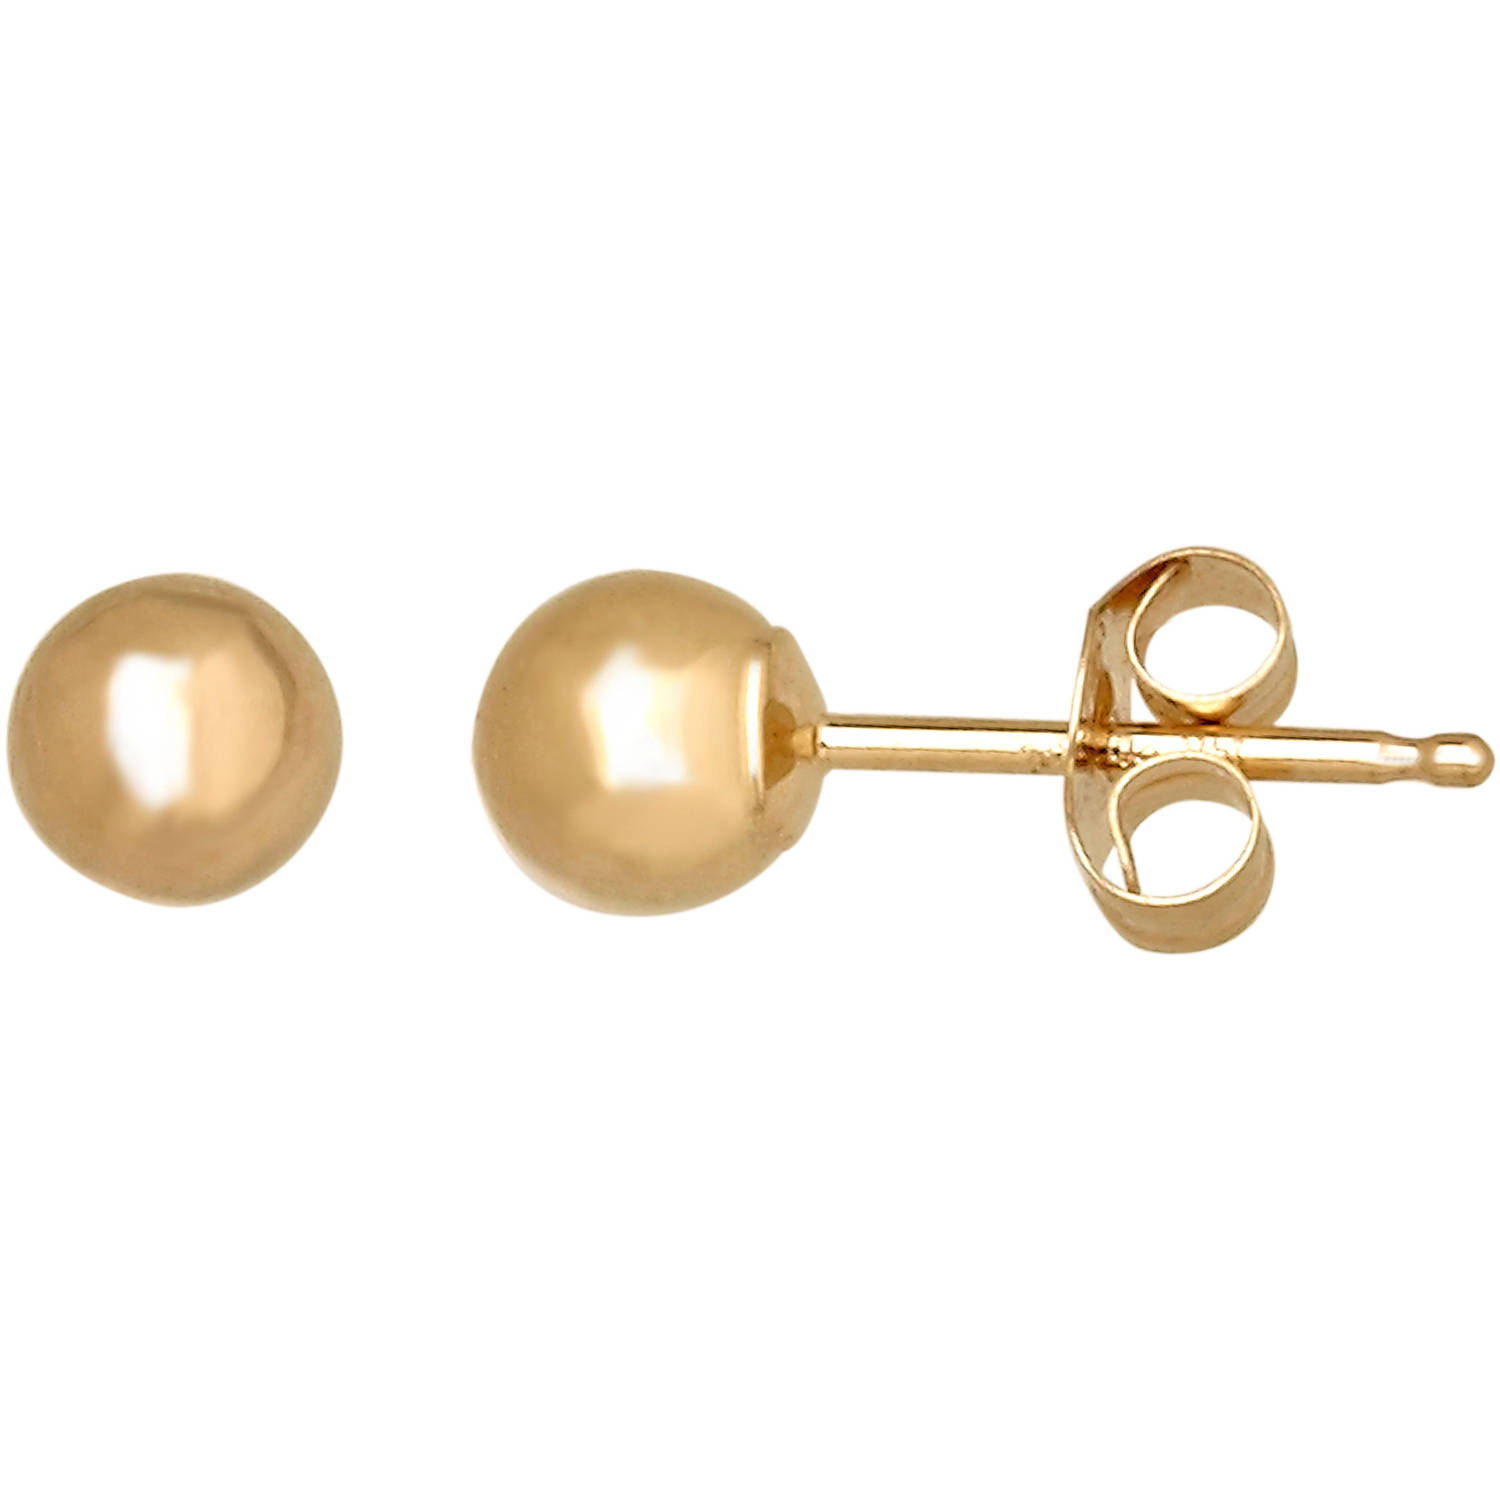 gold stud earrings simply gold 14kt yellow gold 4mm ball stud earrings DTWZZEY